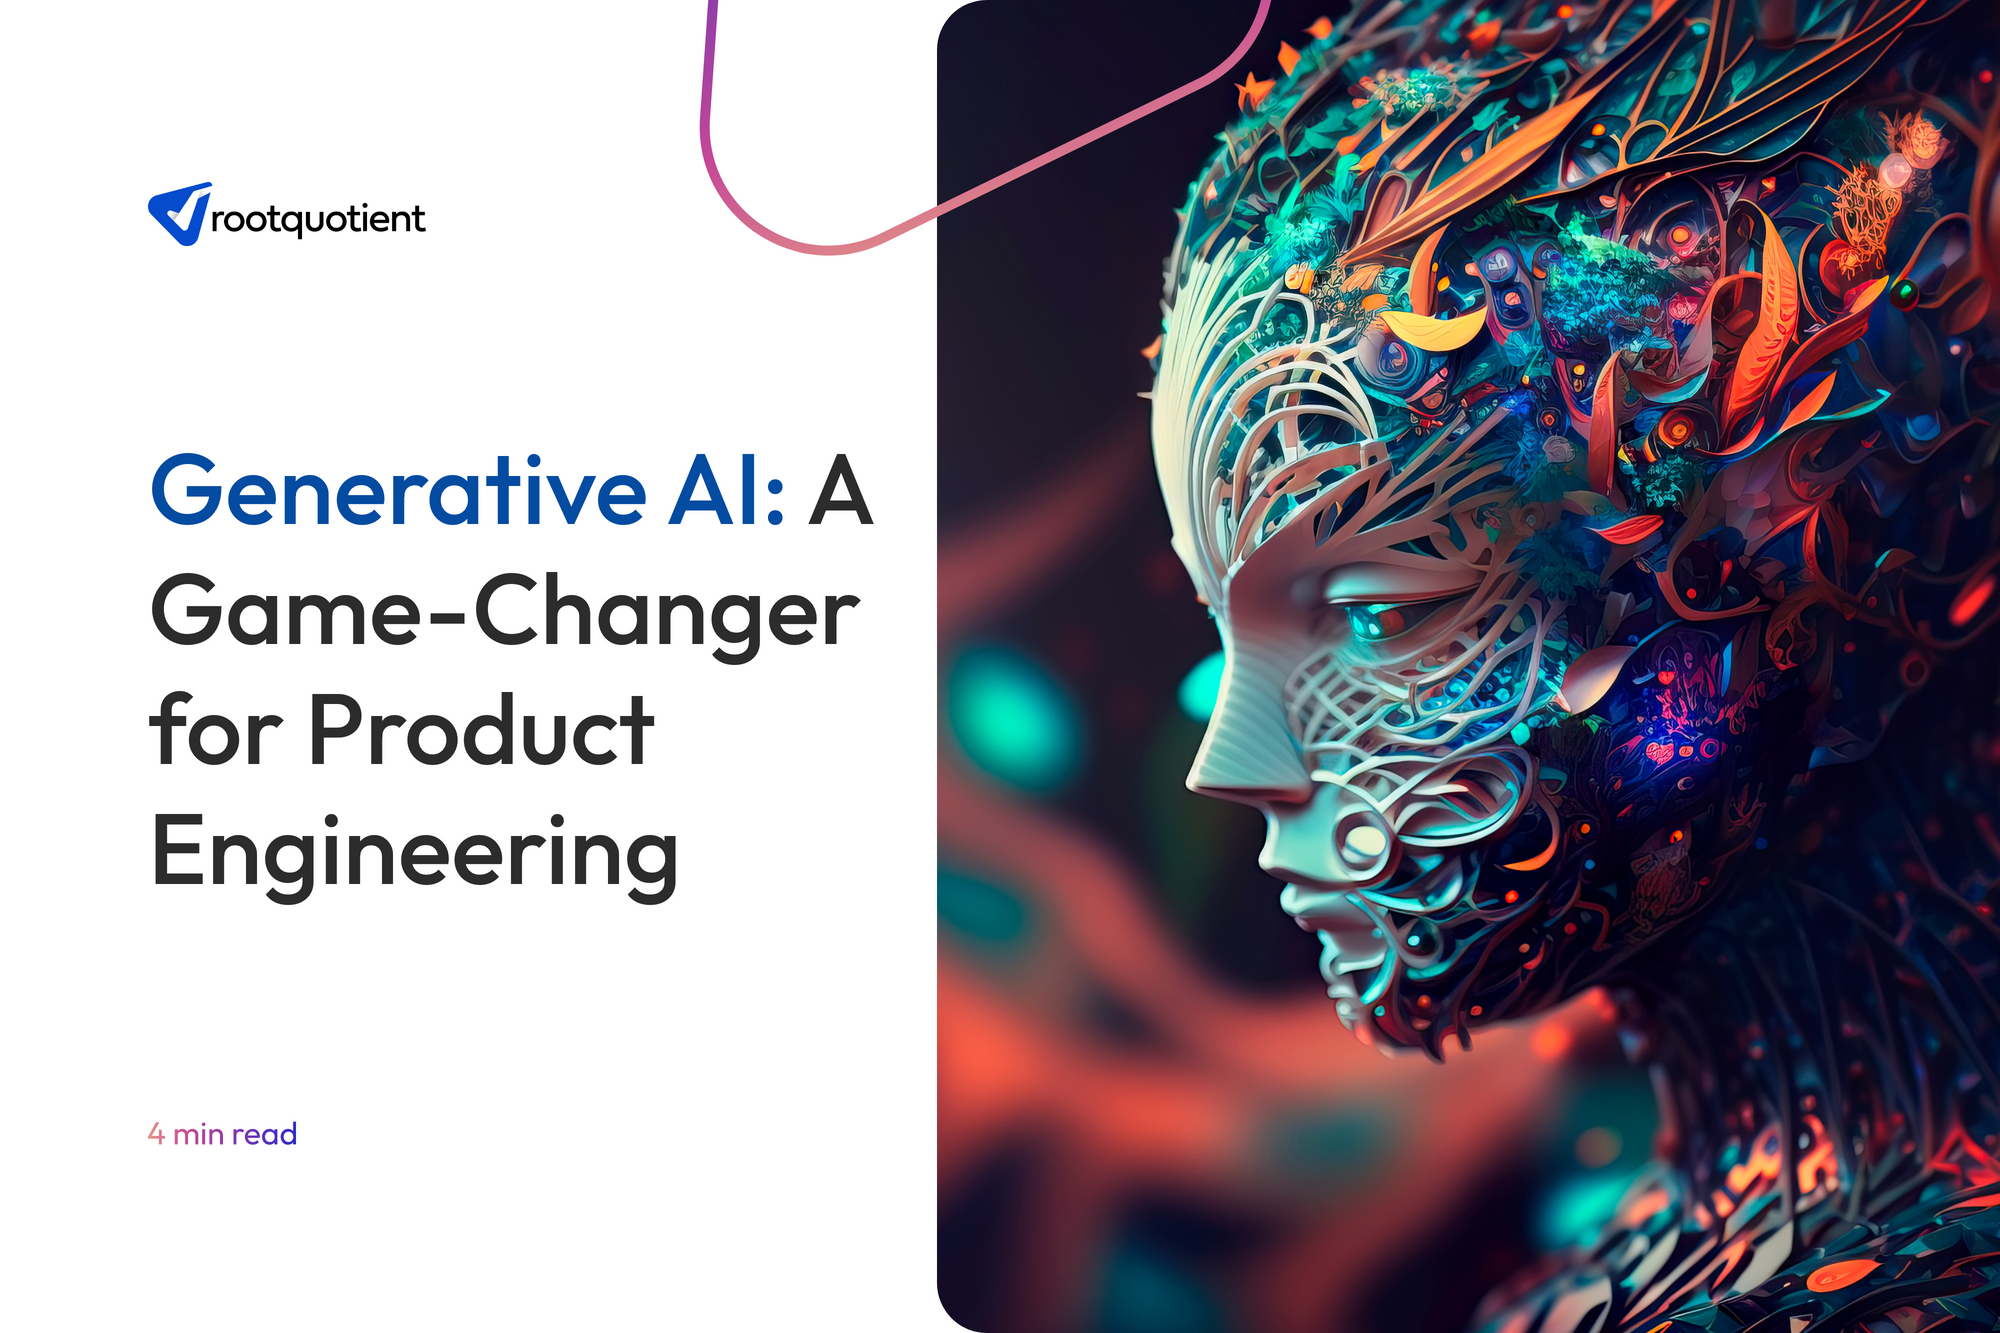 Generative AI: A Game-Changer for Product Engineering